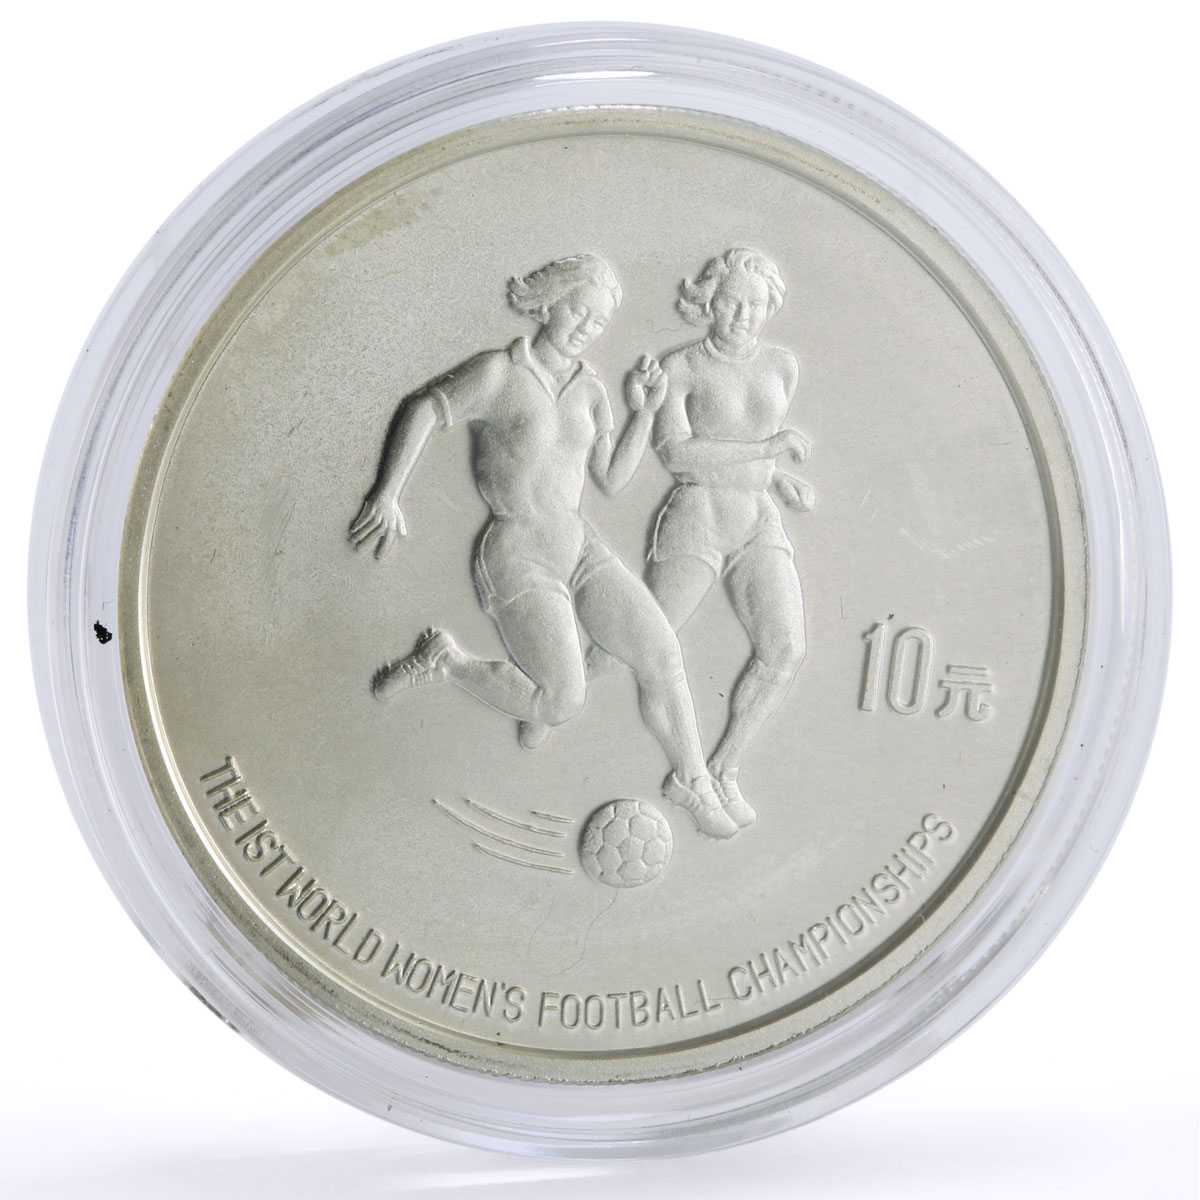 China set of 2 coins Women's 1st Football World Championships silver coins 1991